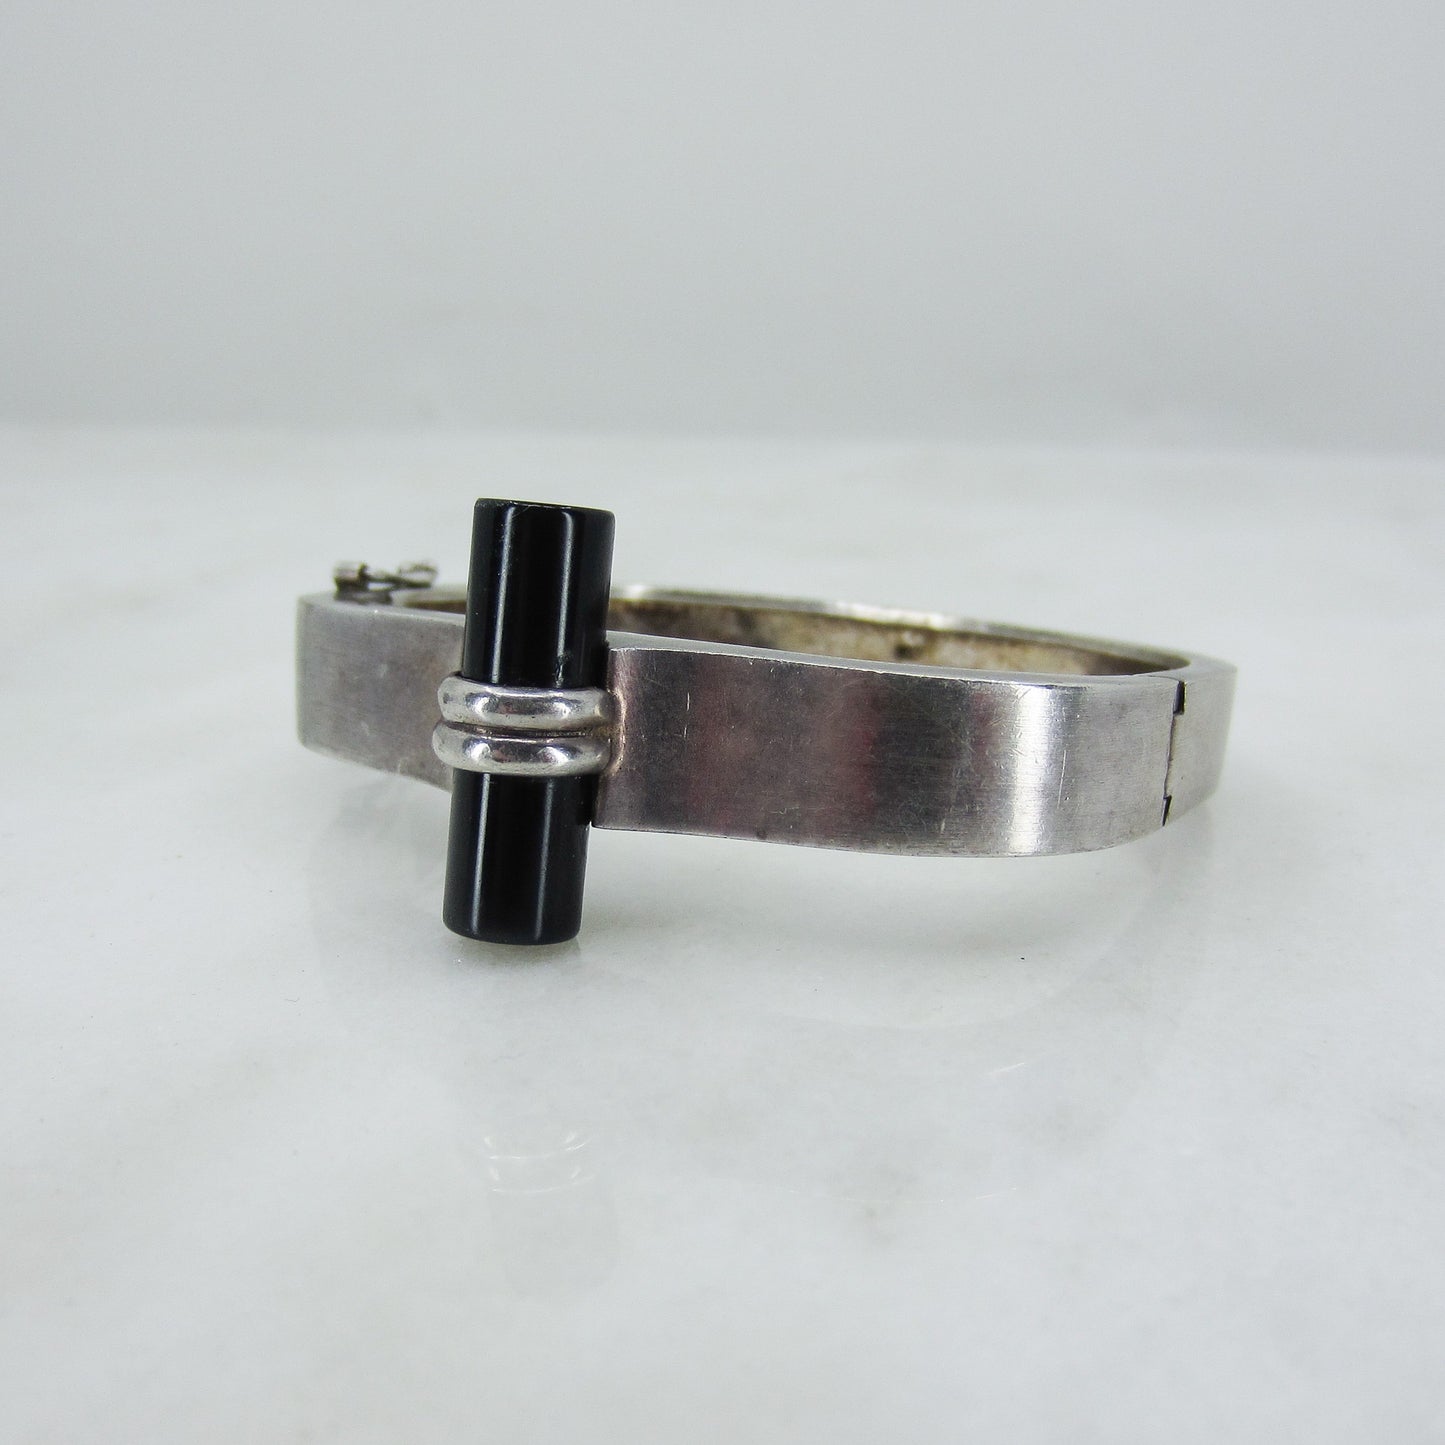 SOLD--Art Deco Onyx Hinged Bangle Sterling Silver c. 1940